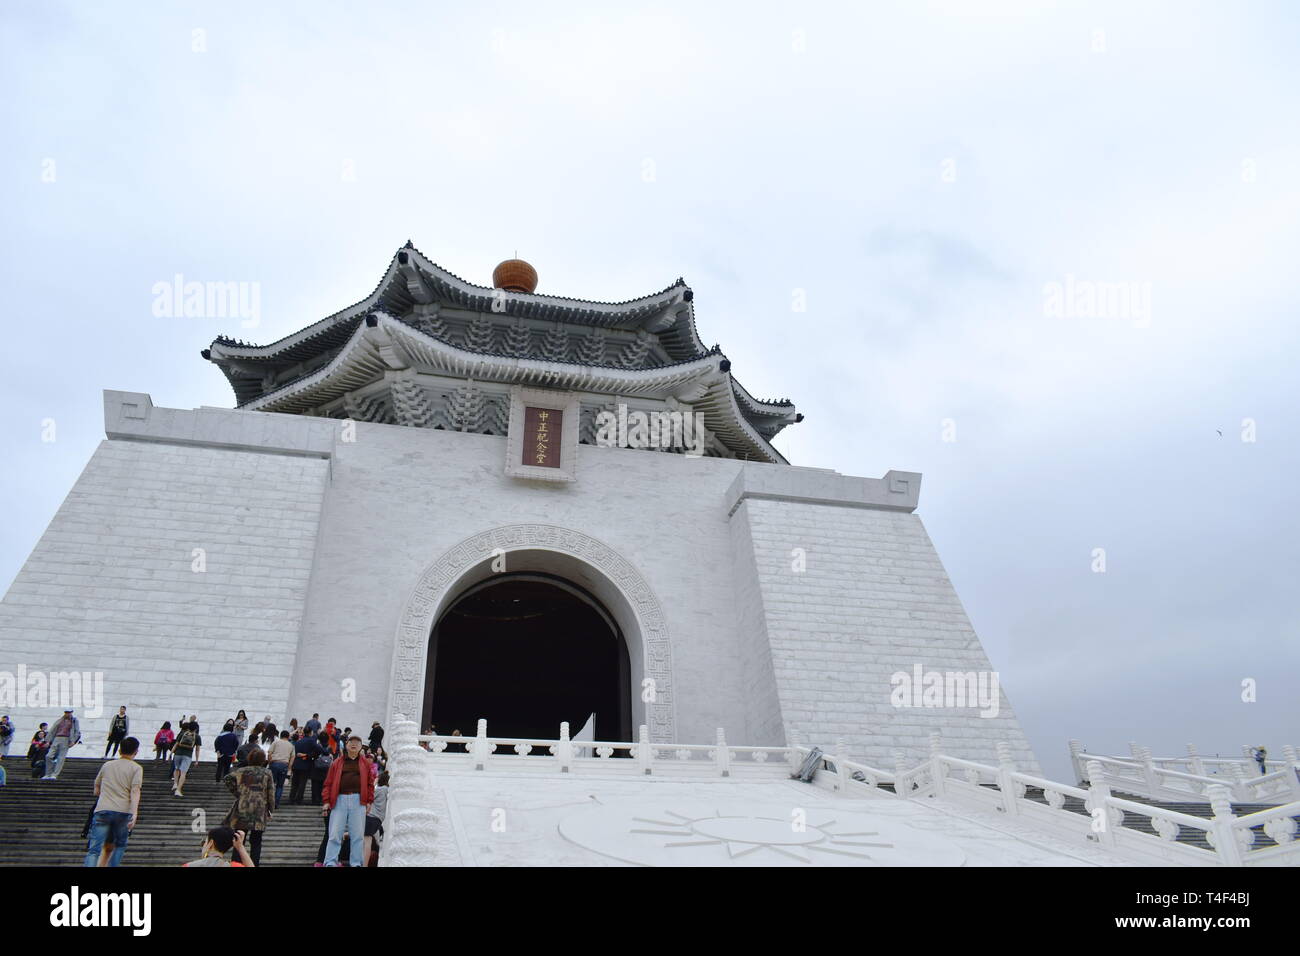 Taipei Taiwan March 30, 2019 : Chiang Kai-Shek memorial Hall the place for reverence and travel landmark Stock Photo